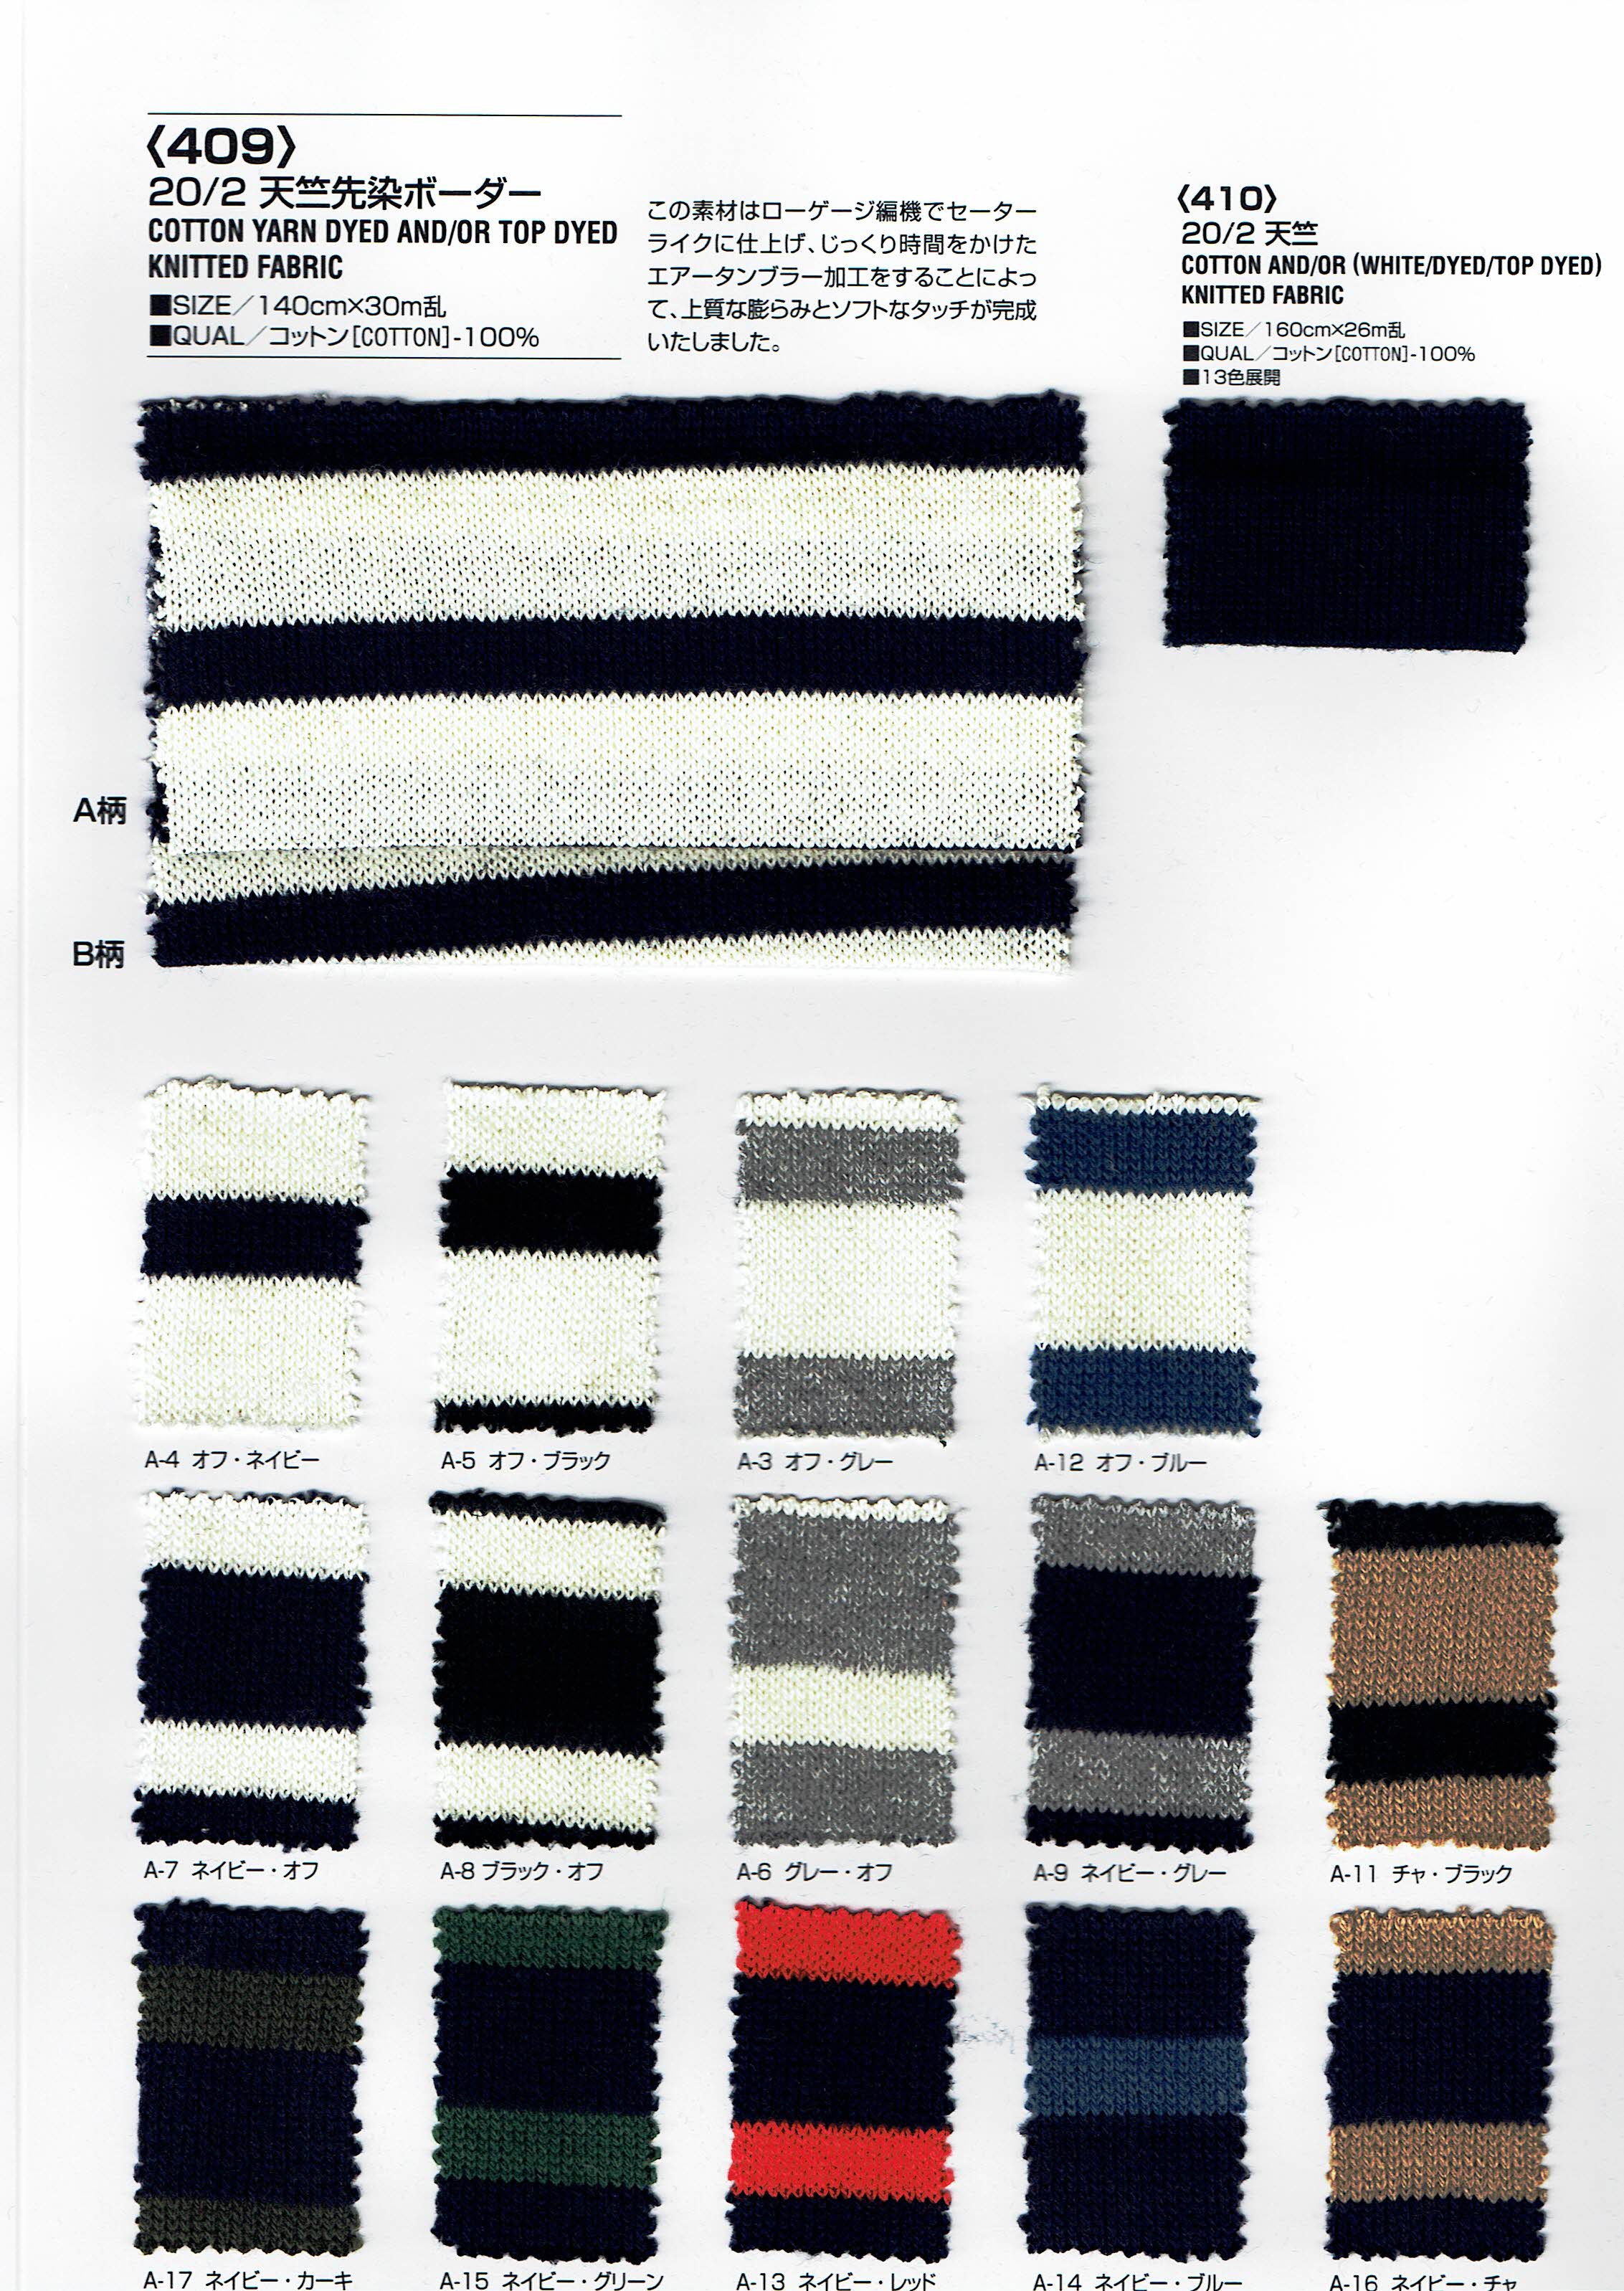 View 100% COTTON YARN DYED AND/OR TOP DYED KNITTED FABRIC